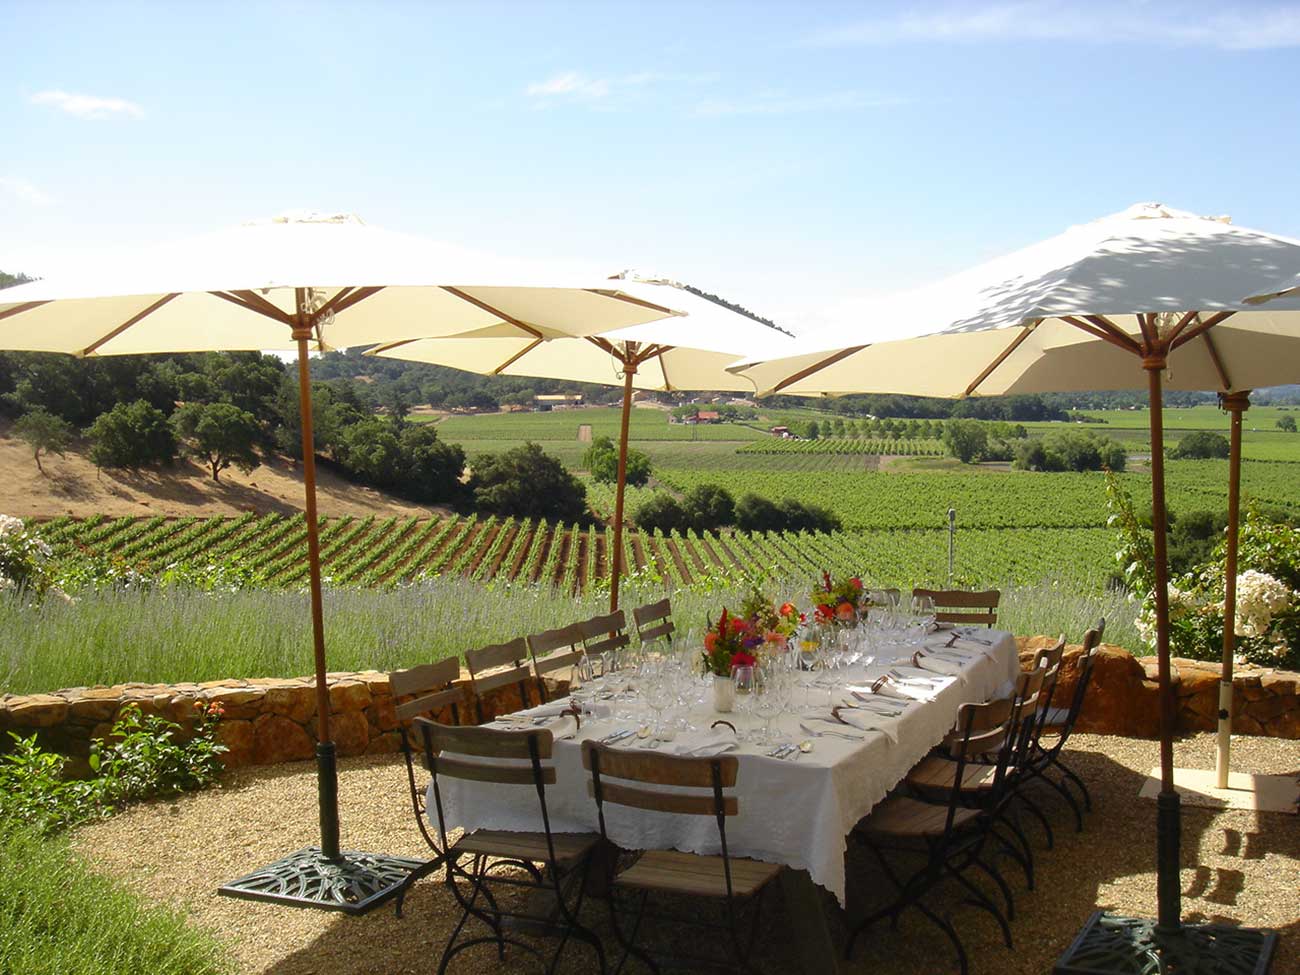 Tabletop design with crystal and flowers overlooking a vineyard in Napa valley